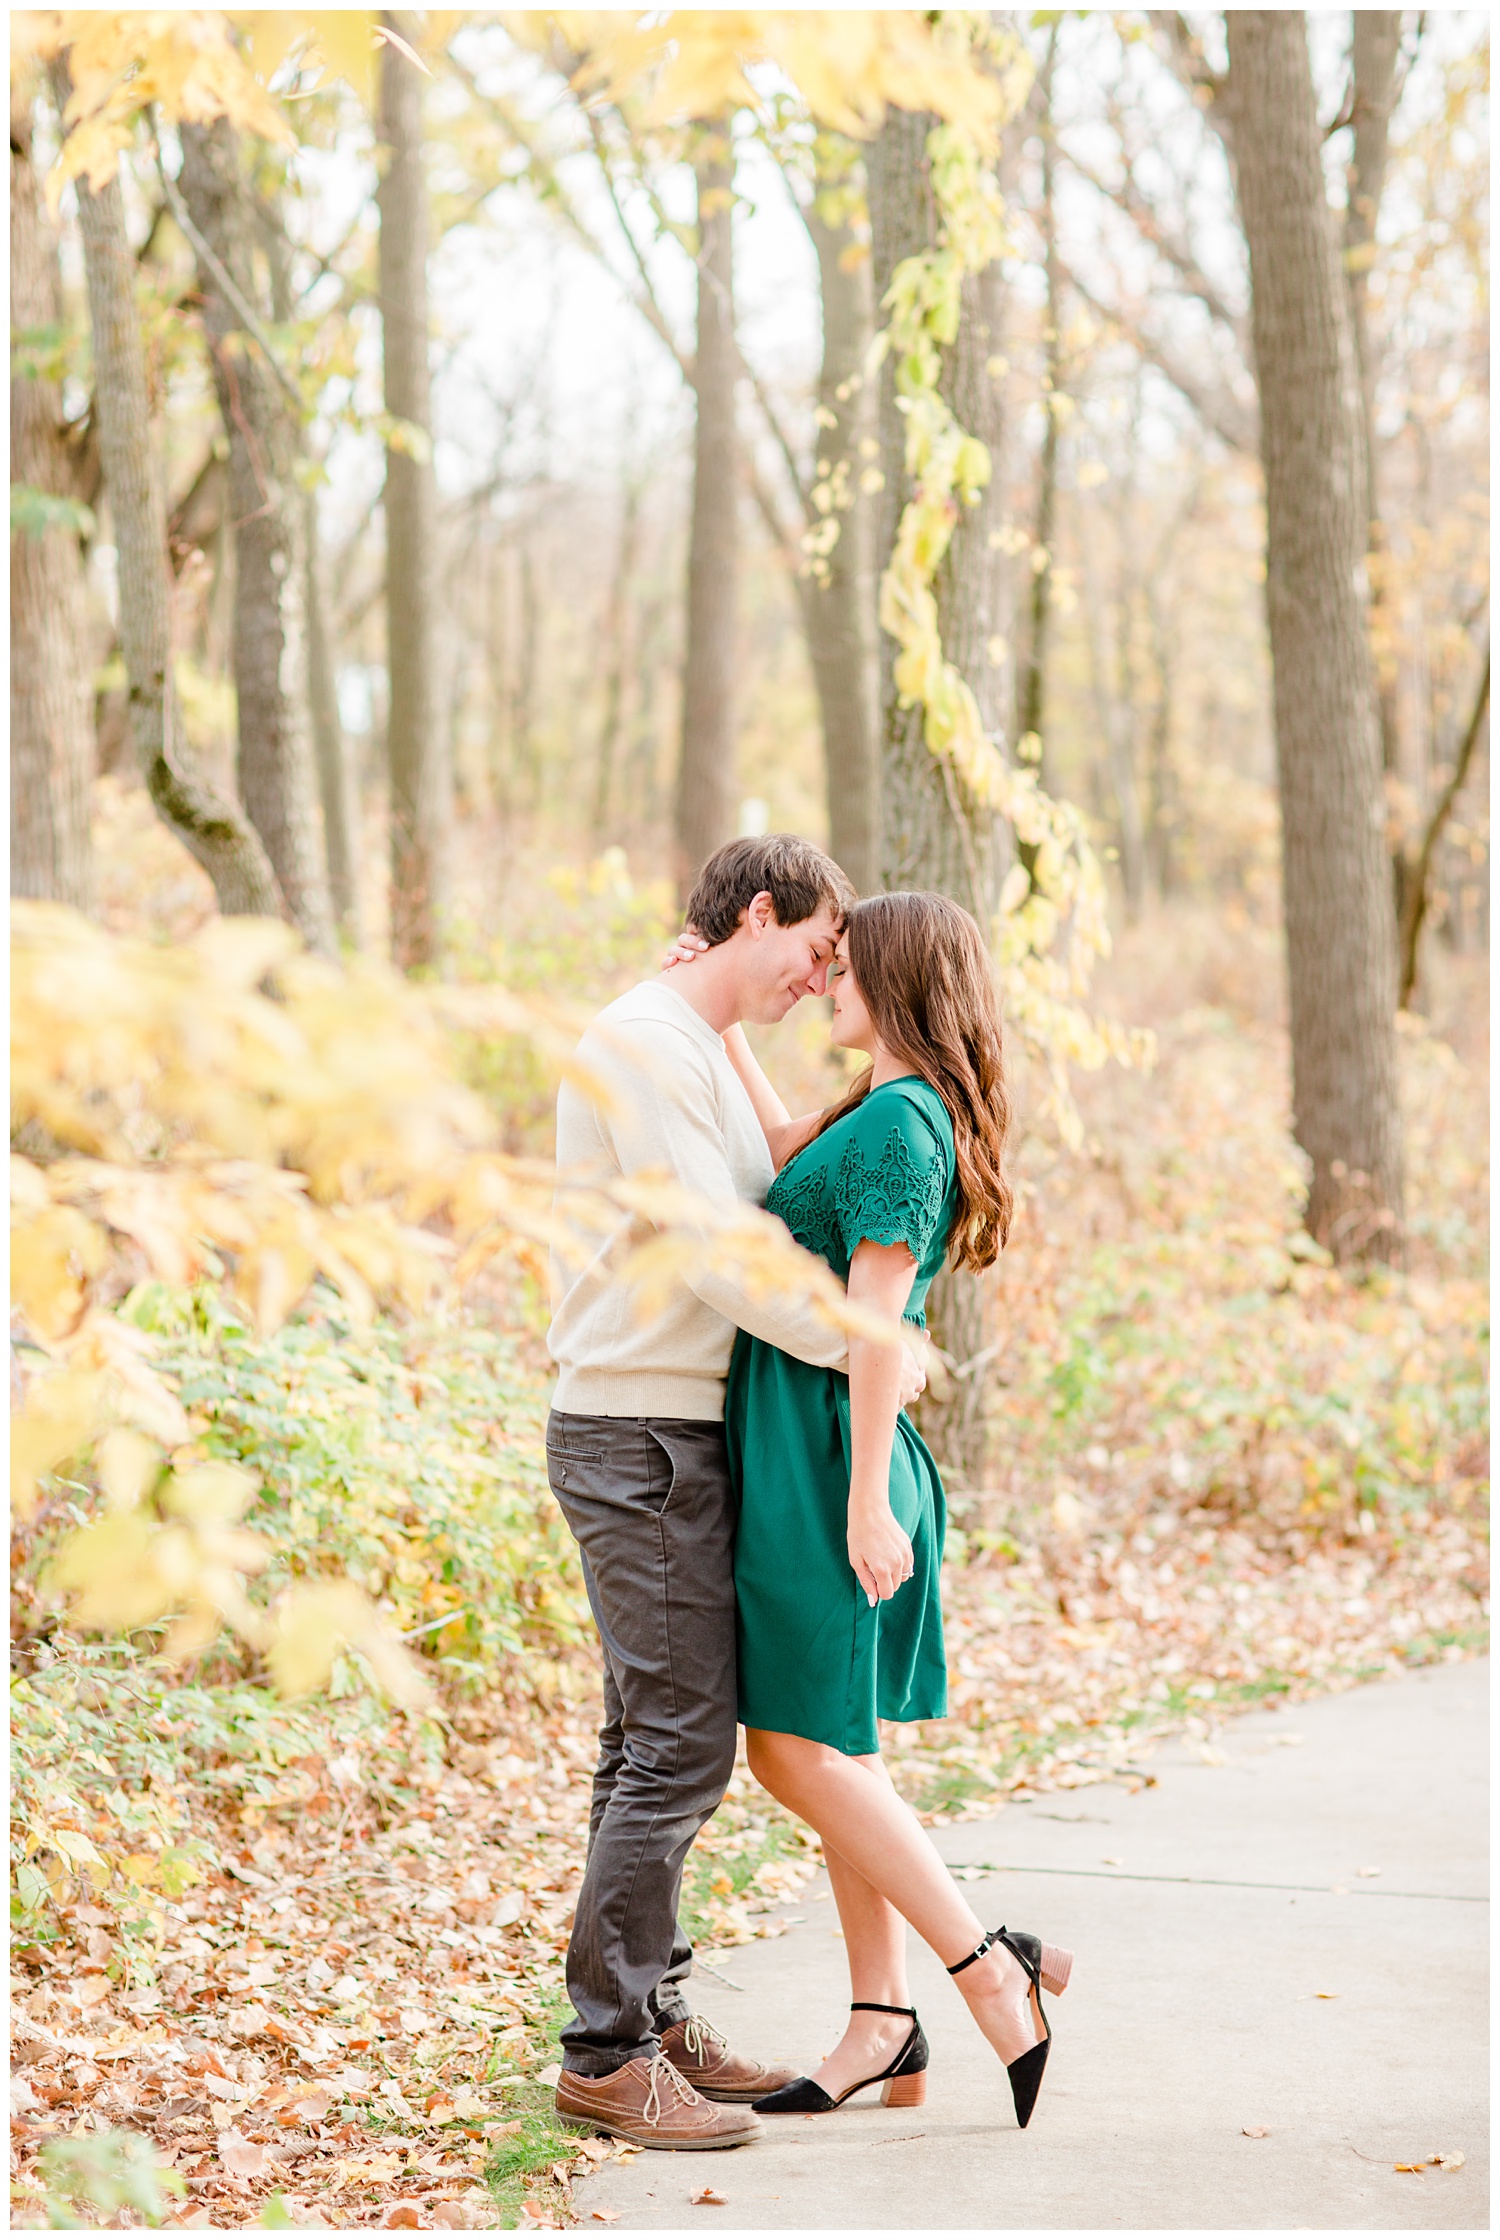 Fall in Iowa, Jenna wearing an emerald green dress embraces Brady in the middle of an autumn path at Lost Island Nature Center | CB Studio